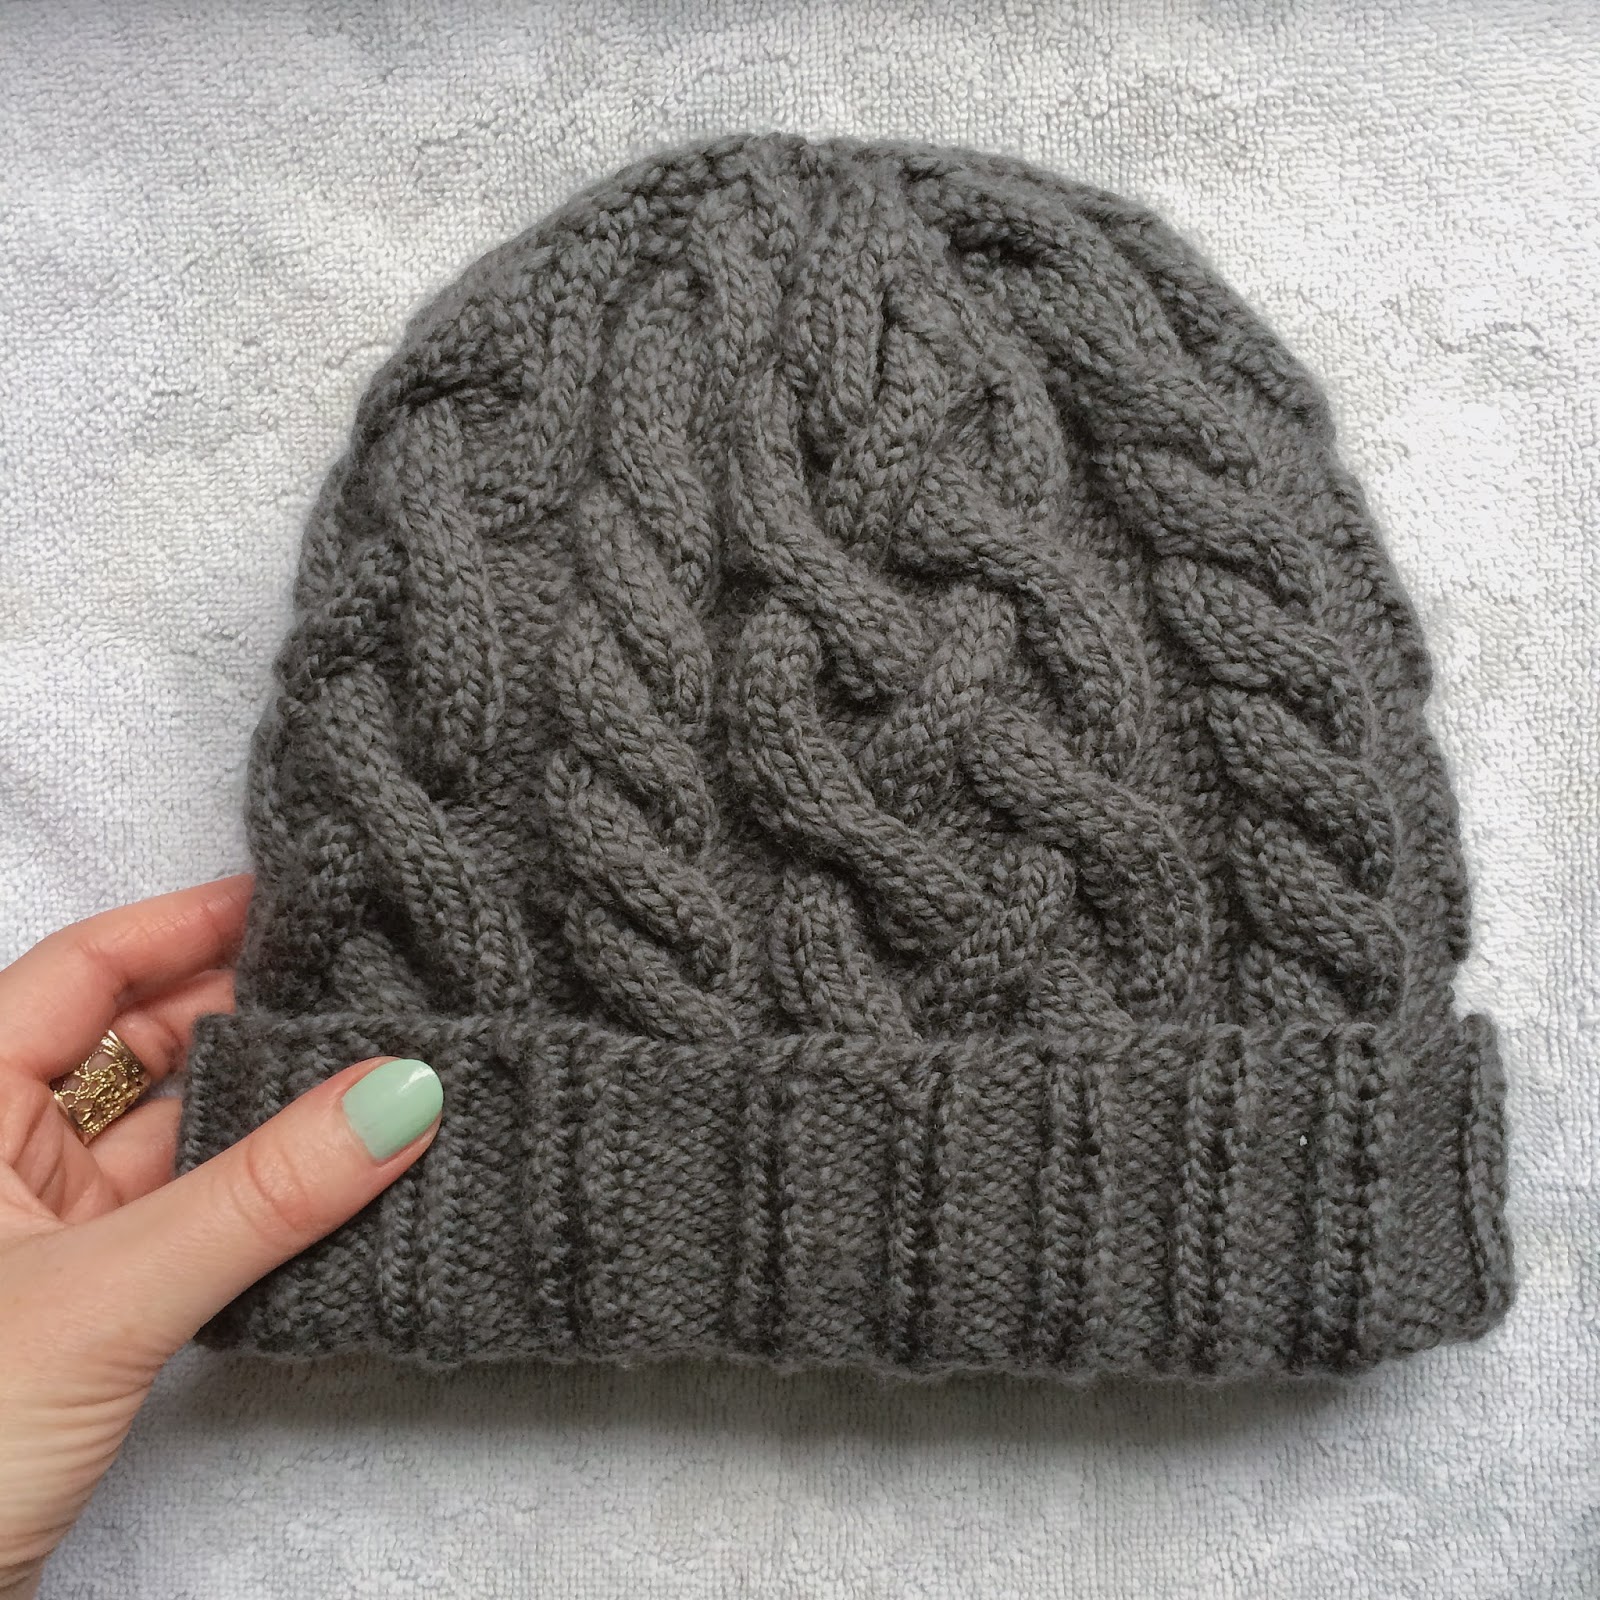 anna knits, etc.: anna knits - traveling cable hat